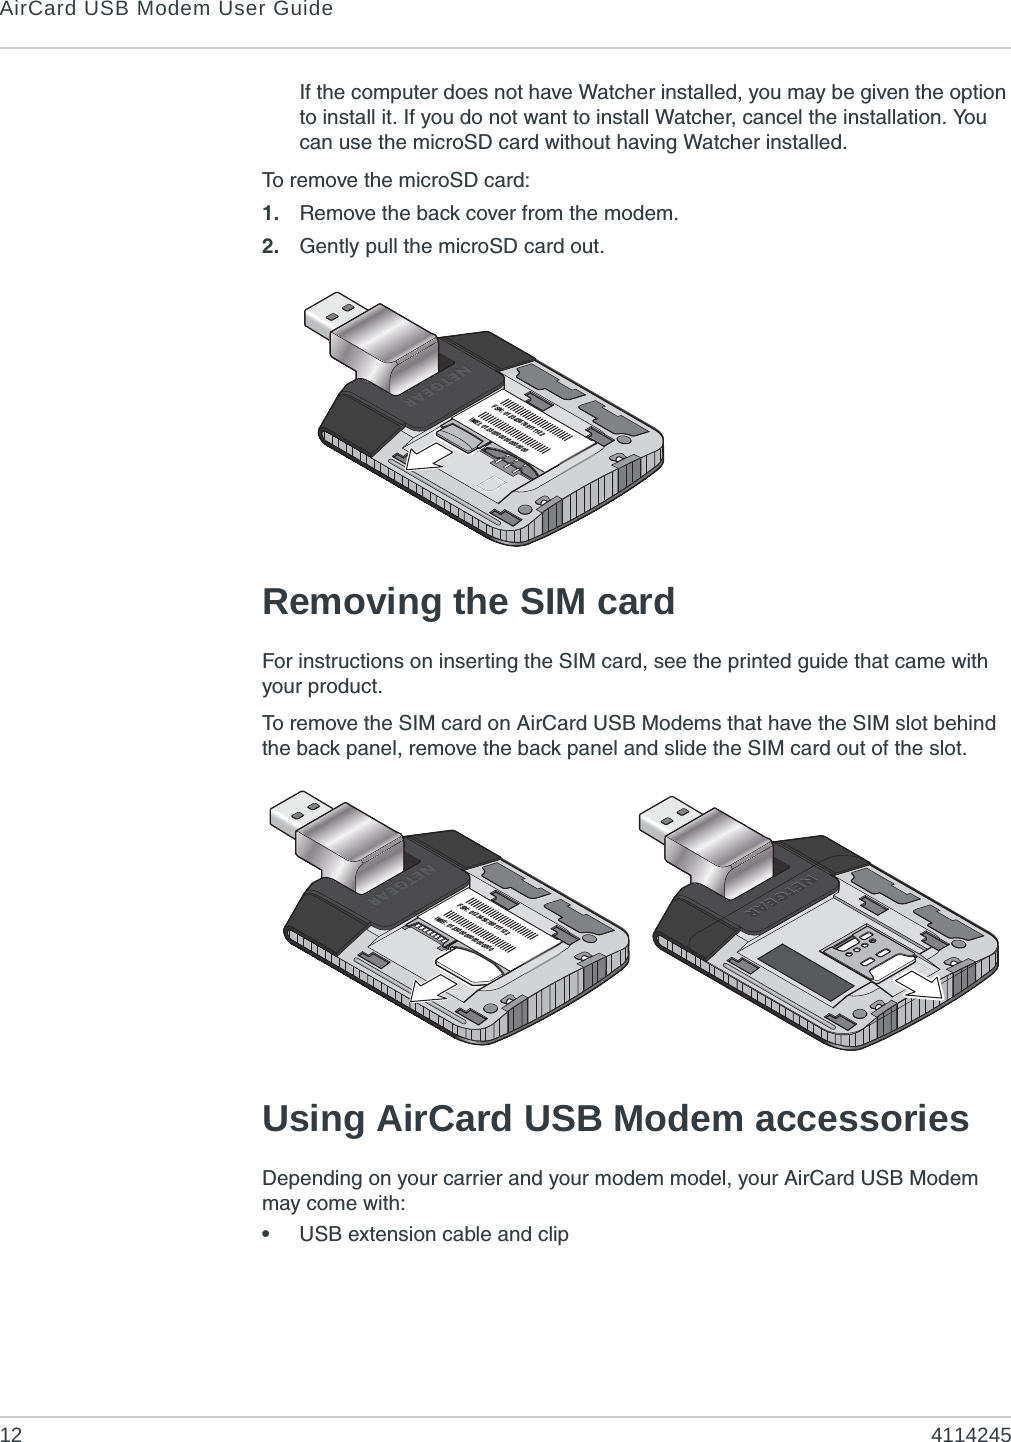 AirCard USB Modem User Guide12 4114245If the computer does not have Watcher installed, you may be given the option to install it. If you do not want to install Watcher, cancel the installation. You can use the microSD card without having Watcher installed.To remove the microSD card:1. Remove the back cover from the modem.2. Gently pull the microSD card out.Removing the SIM cardFor instructions on inserting the SIM card, see the printed guide that came with your product.To remove the SIM card on AirCard USB Modems that have the SIM slot behind the back panel, remove the back panel and slide the SIM card out of the slot.Using AirCard USB Modem accessoriesDepending on your carrier and your modem model, your AirCard USB Modem may come with:•USB extension cable and clipFSN: 0123456789111122IMEI: 012300000000000000FSN: 0123456789111122IMEI: 012300000000000000